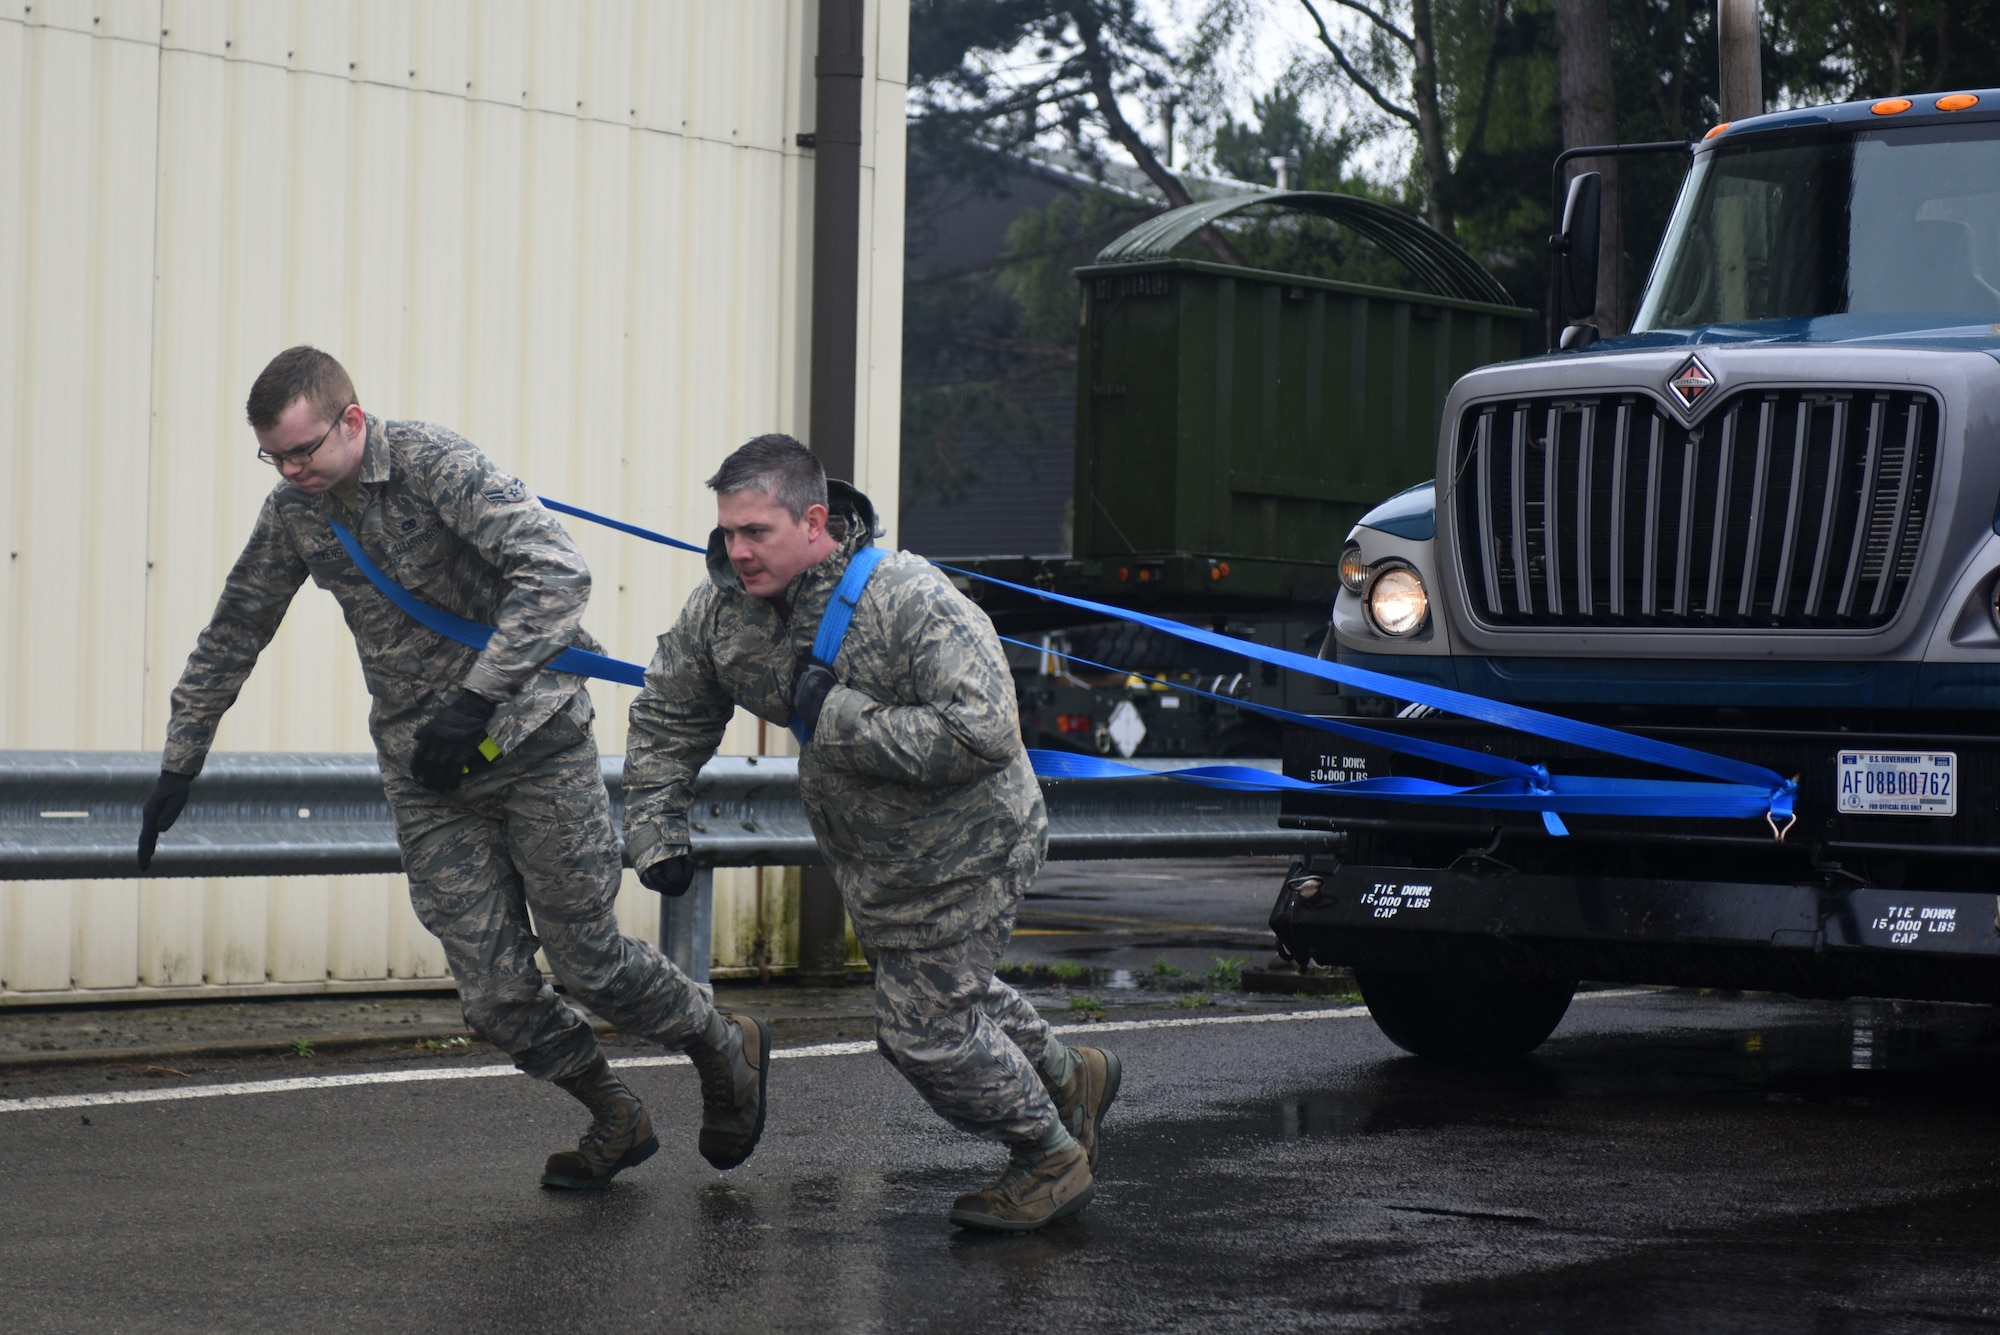 Airmen from the 100th Logistic Readiness Squadron pull a tractor trailer during a ground transportation rodeo at Royal Air Force Lakenheath, England, April 27, 2018. The rodeo offered the opportunity for Airmen from the 48th and 100th LRS the chance to network and compete against their counterparts in a variety of events.(U.S. Air Force photo by Senior Airman Eli Chevalier)